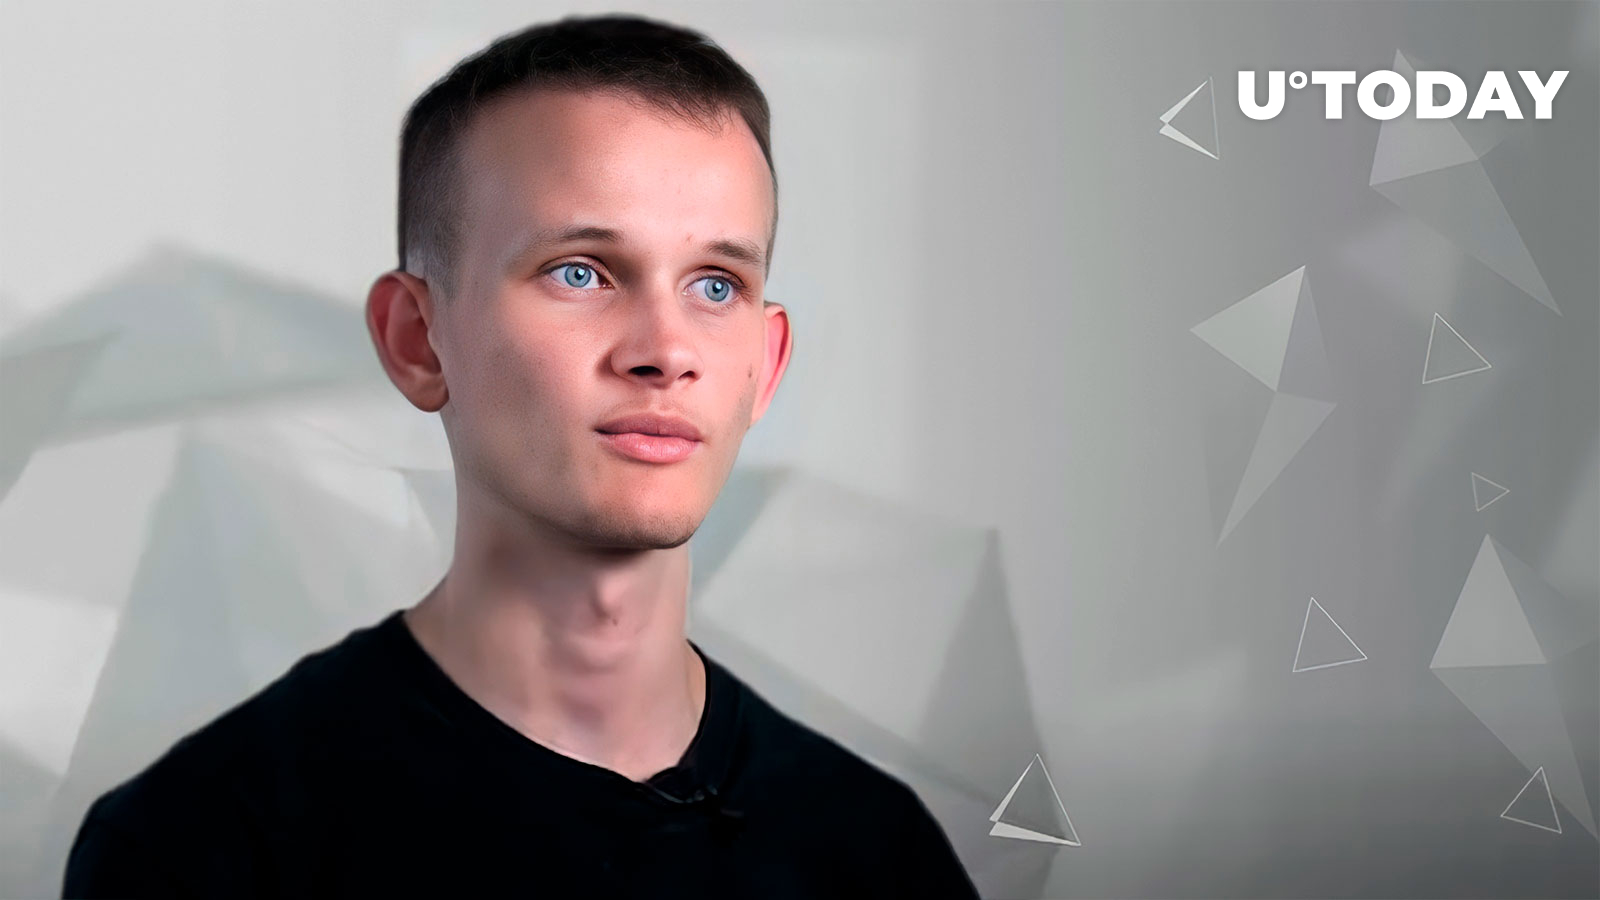 Will Ethereum Be Harmed by New Forks? Vitalik Buterin Shares His Take